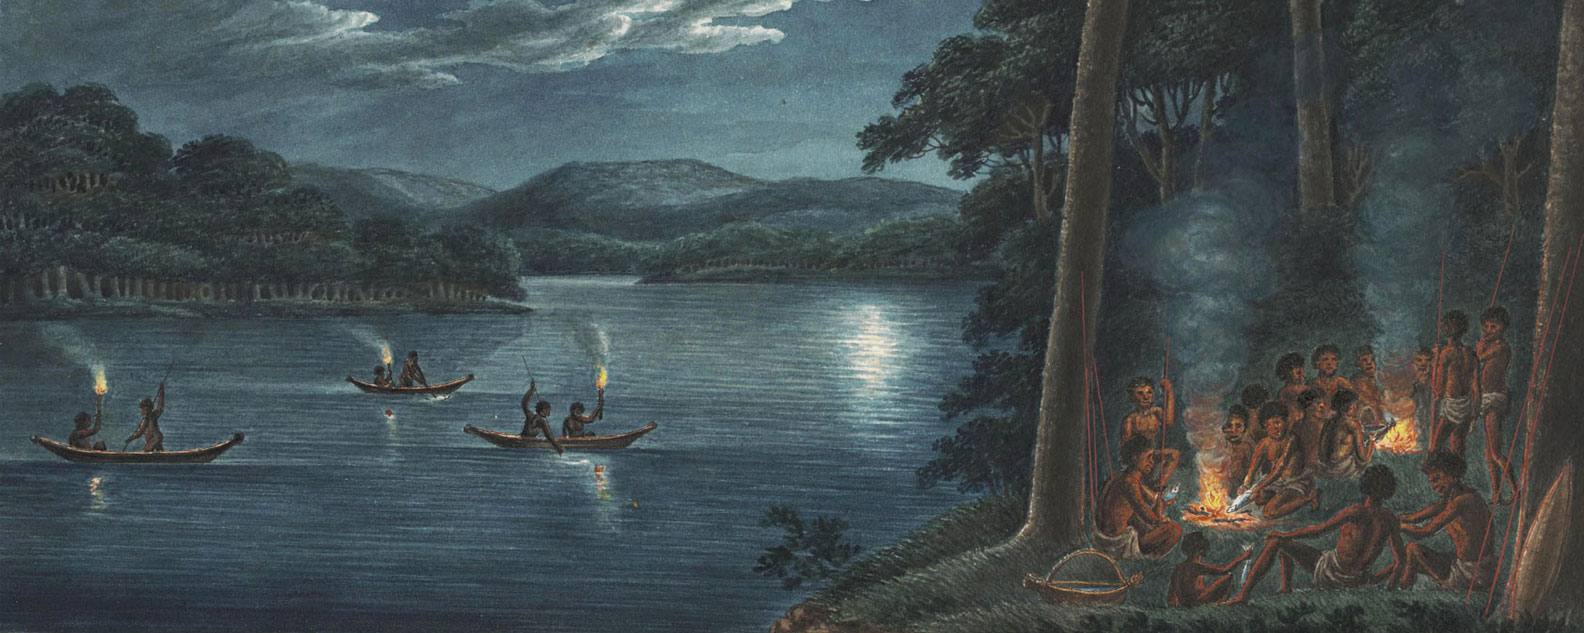 Detail from a Joseph Lycett painting of First Nations peoples fishing and sitting around a fire at night.